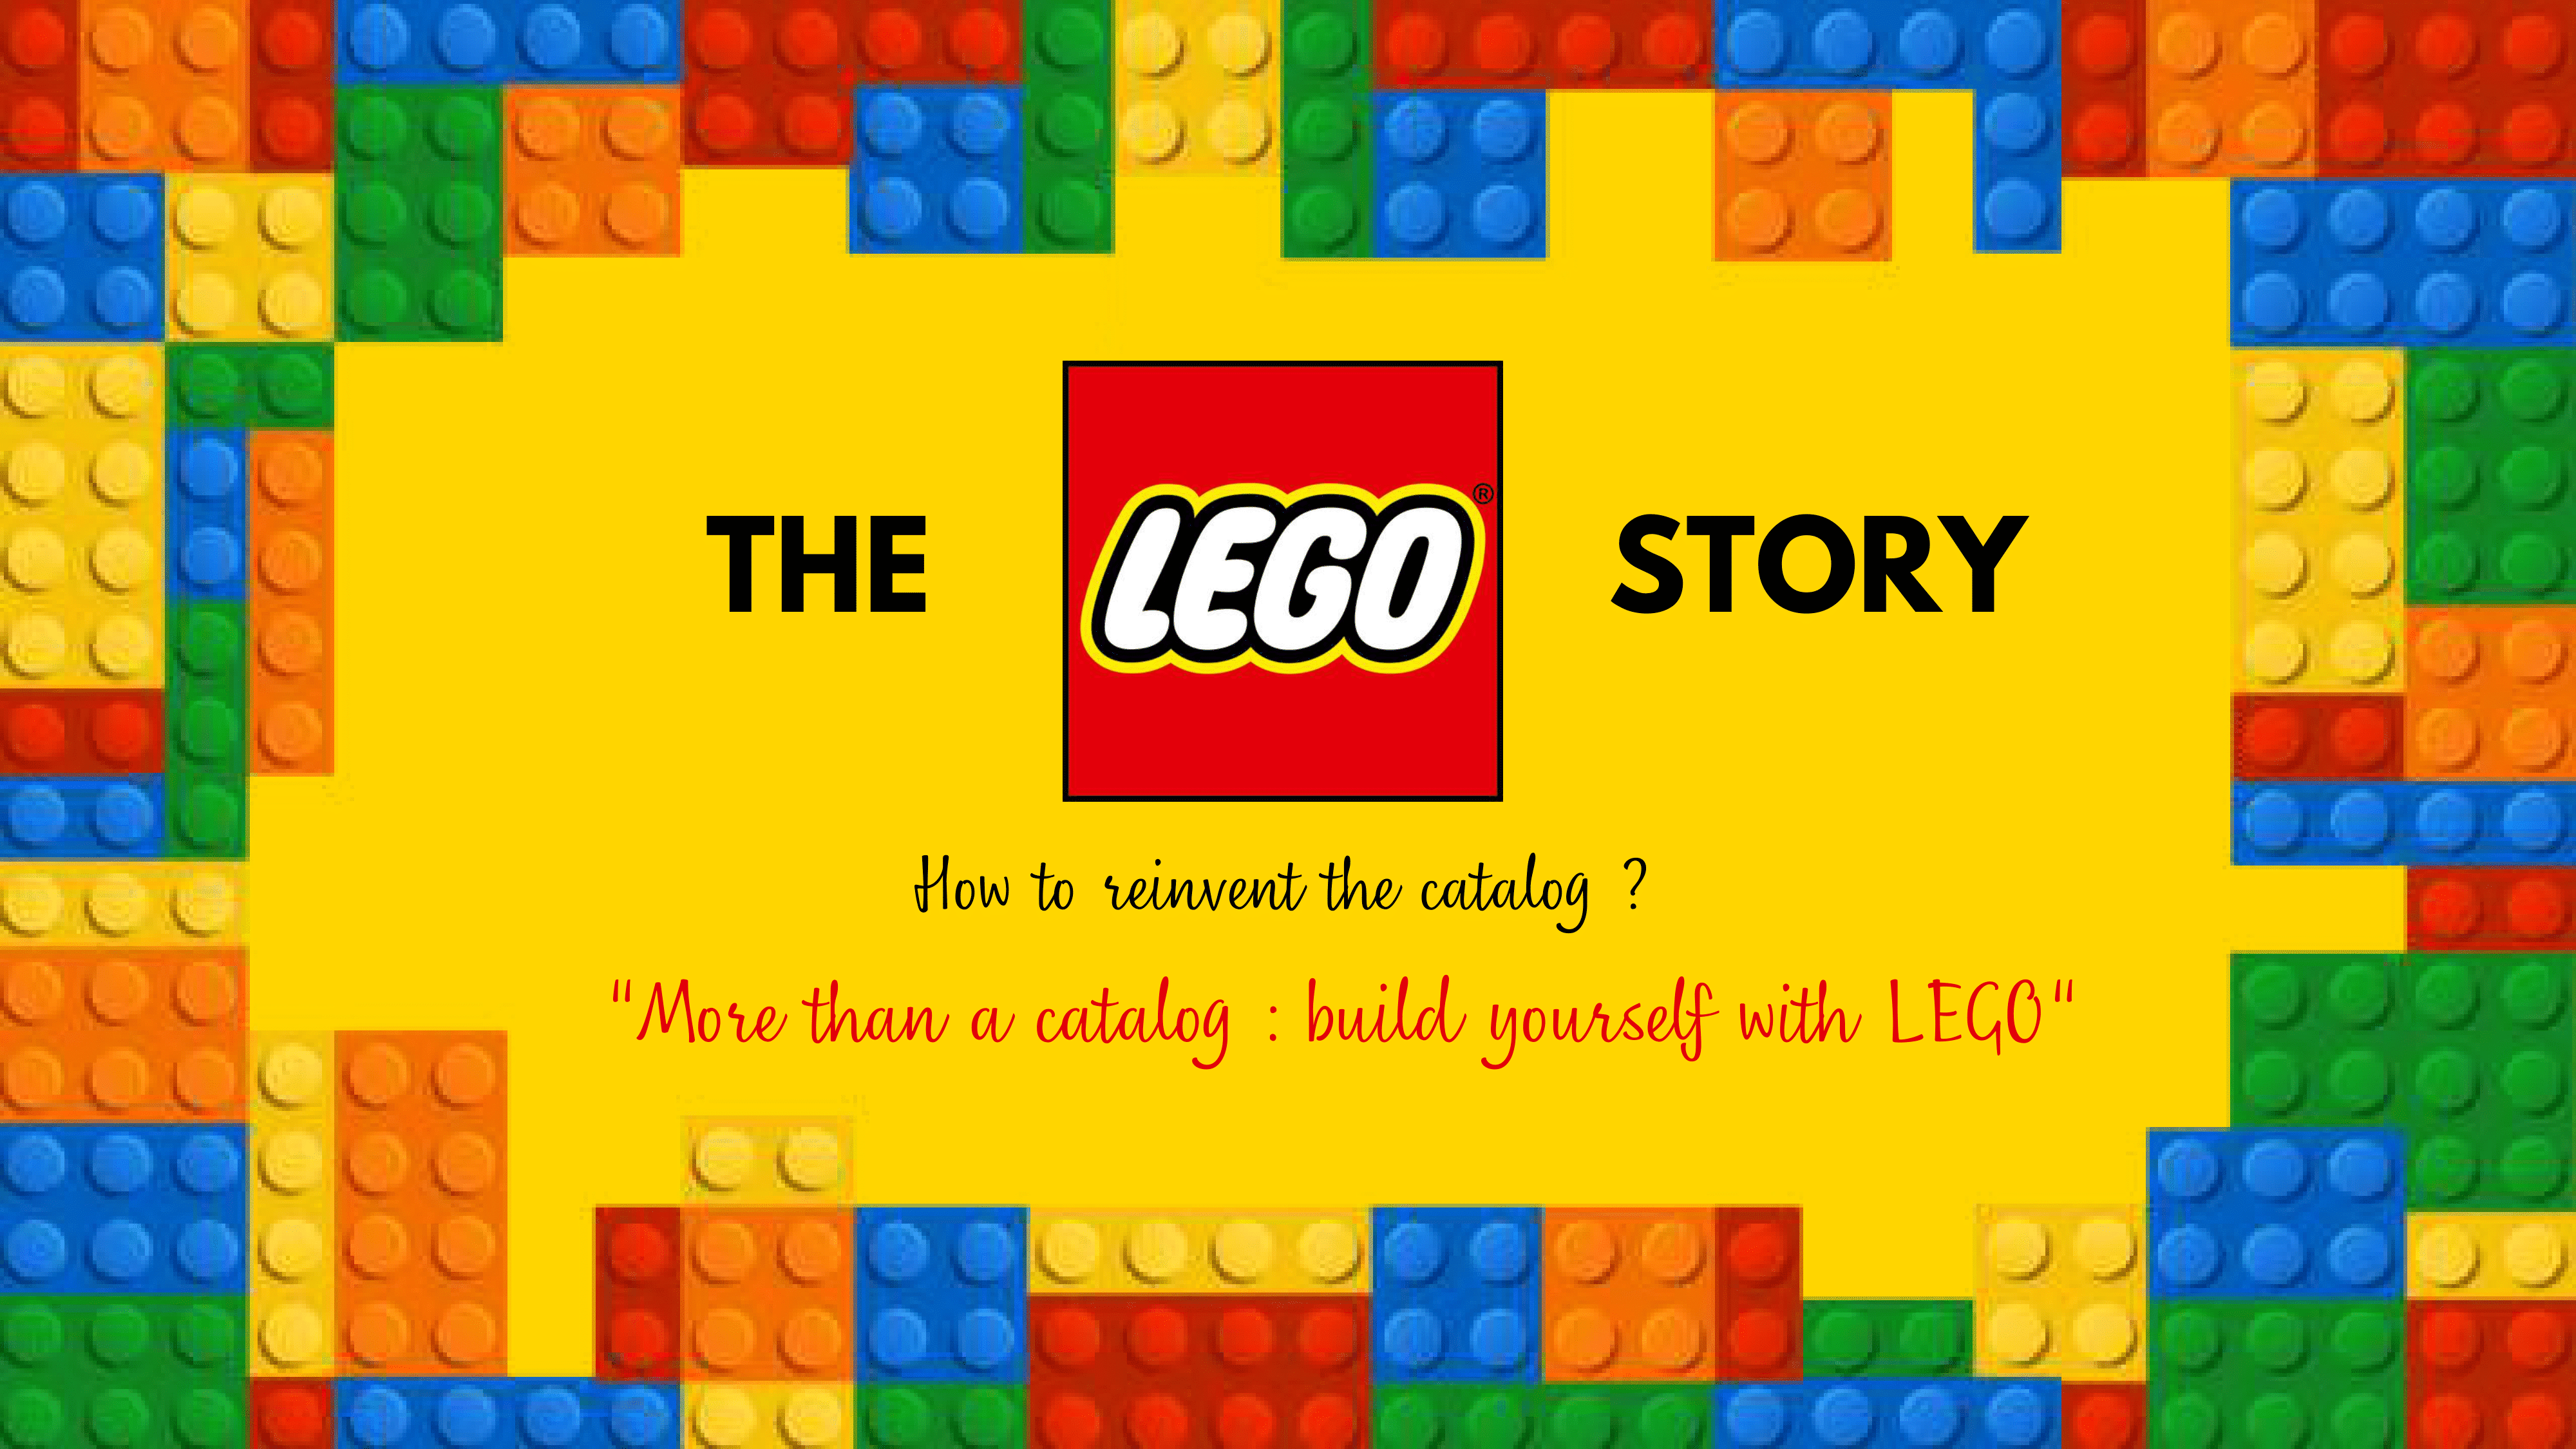 Presentation_Mémaux_Team___Campaign_More_than_a_catalog_build_yourself_with_LEGO____Competition_Ad_Venture-01